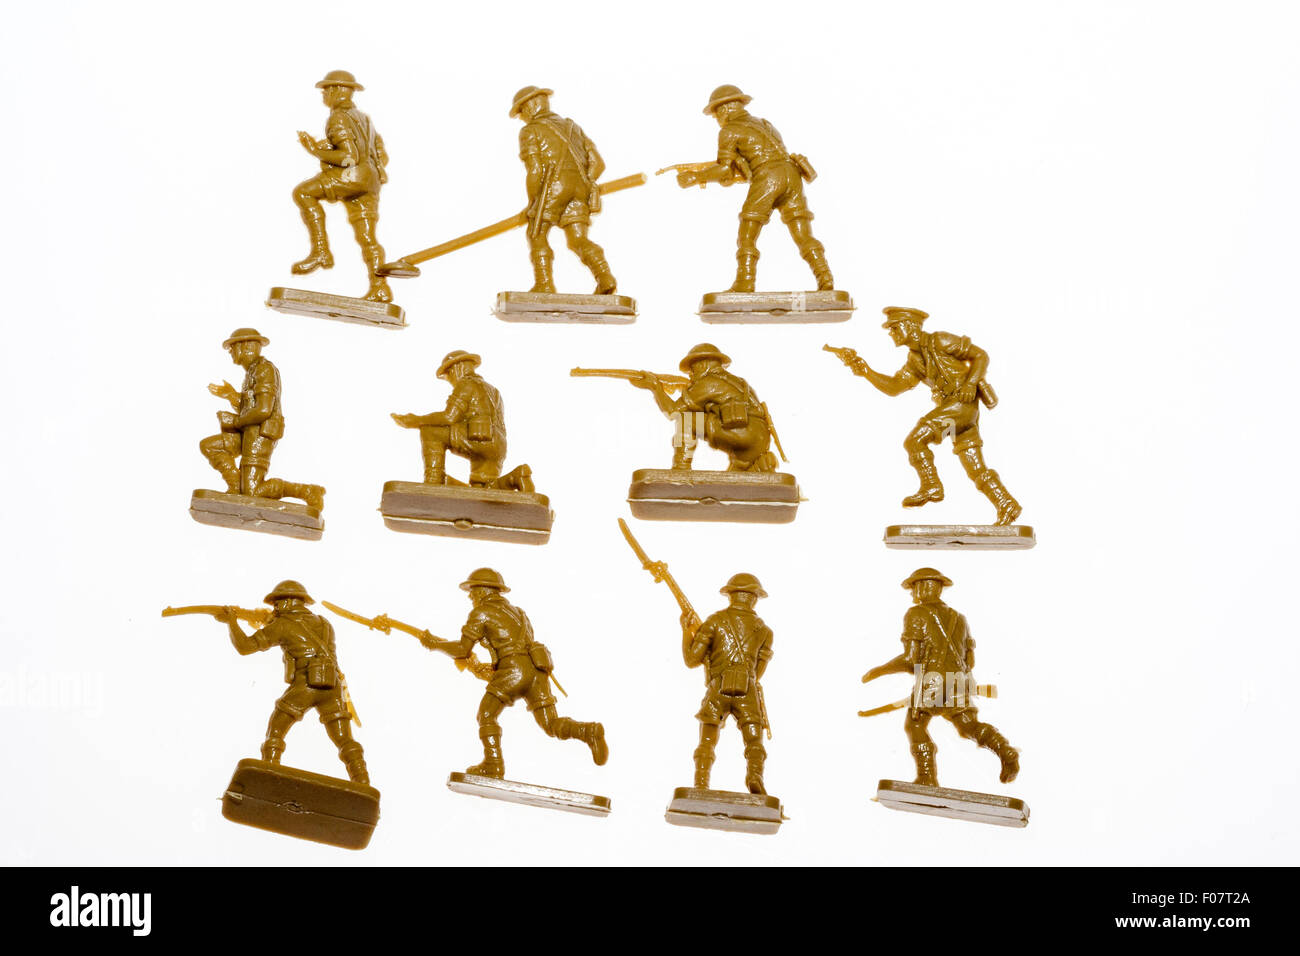 Airfix, HO/OO, 1/72 scale plastic model figures. World War Two, 8th army. Three rows of soldiers on plain white background. 1970s second series set. Stock Photo